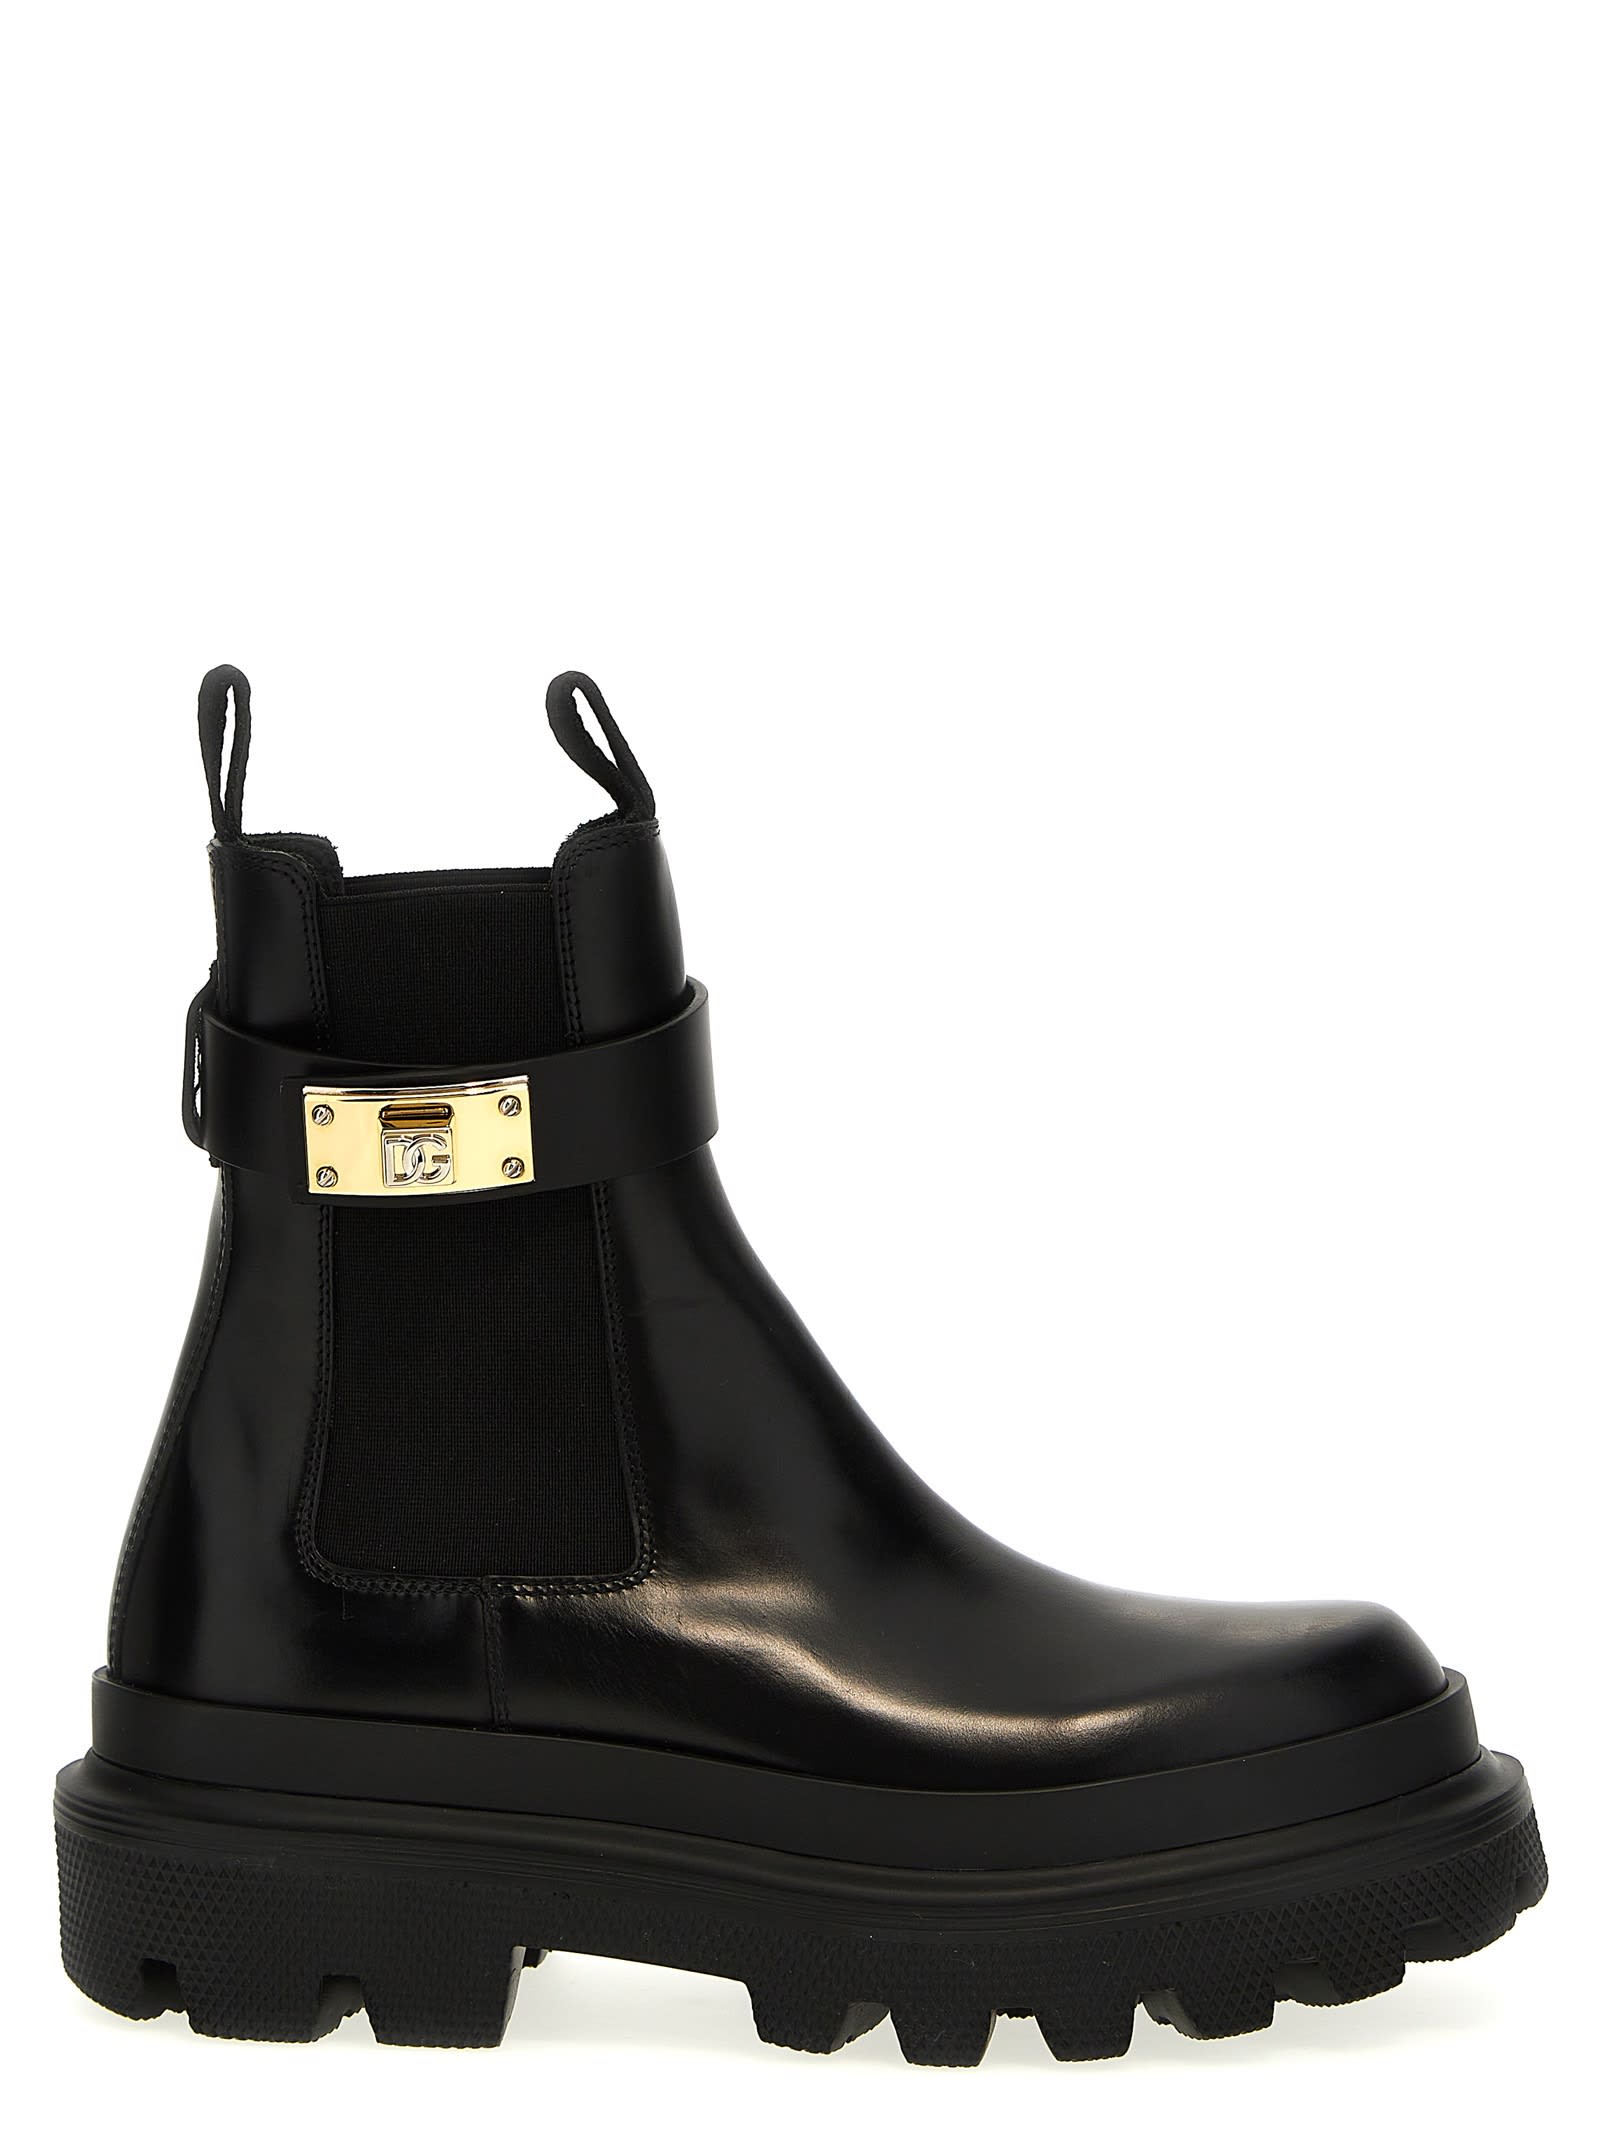 DOLCE & GABBANA LOGO STRAP LEATHER ANKLE BOOTS